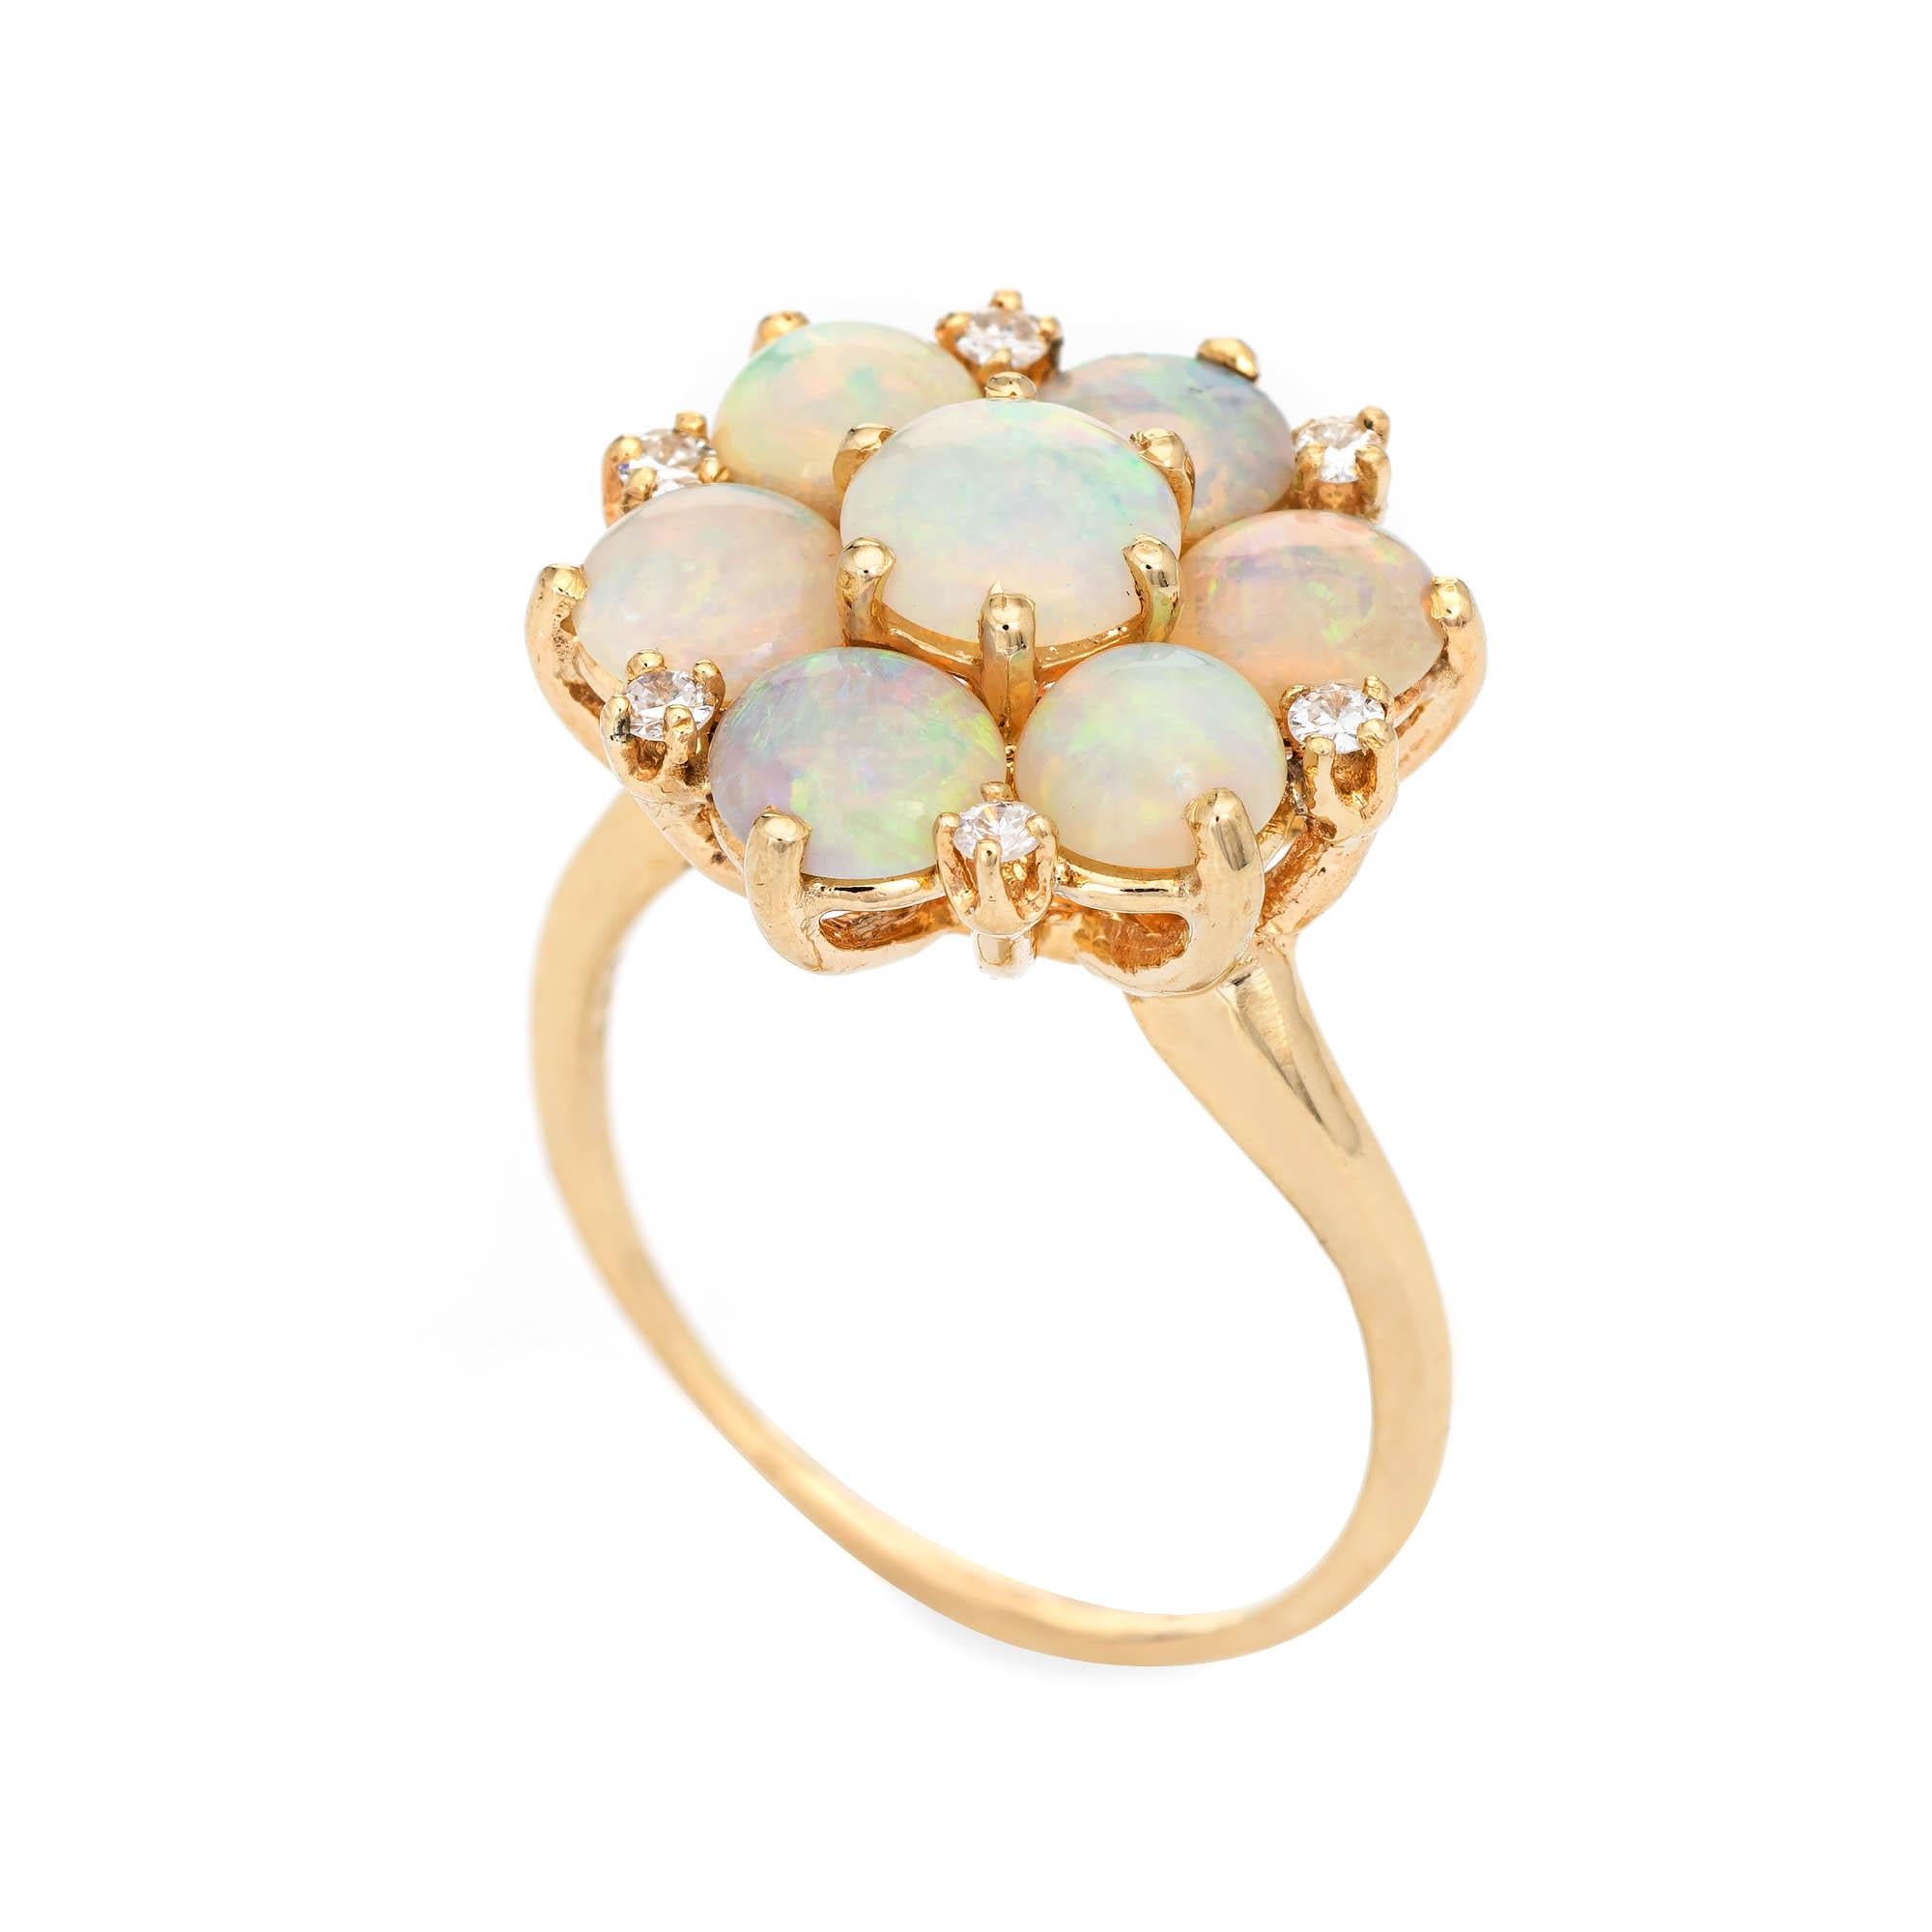 Stylish vintage opal & diamond cluster cocktail ring crafted in 14 karat yellow gold. 

The center opal measures 6mm and is estimated at 0.60 carats, accented with six opals estimated at .50 carats each. the total opal weight is estimated at 3.60